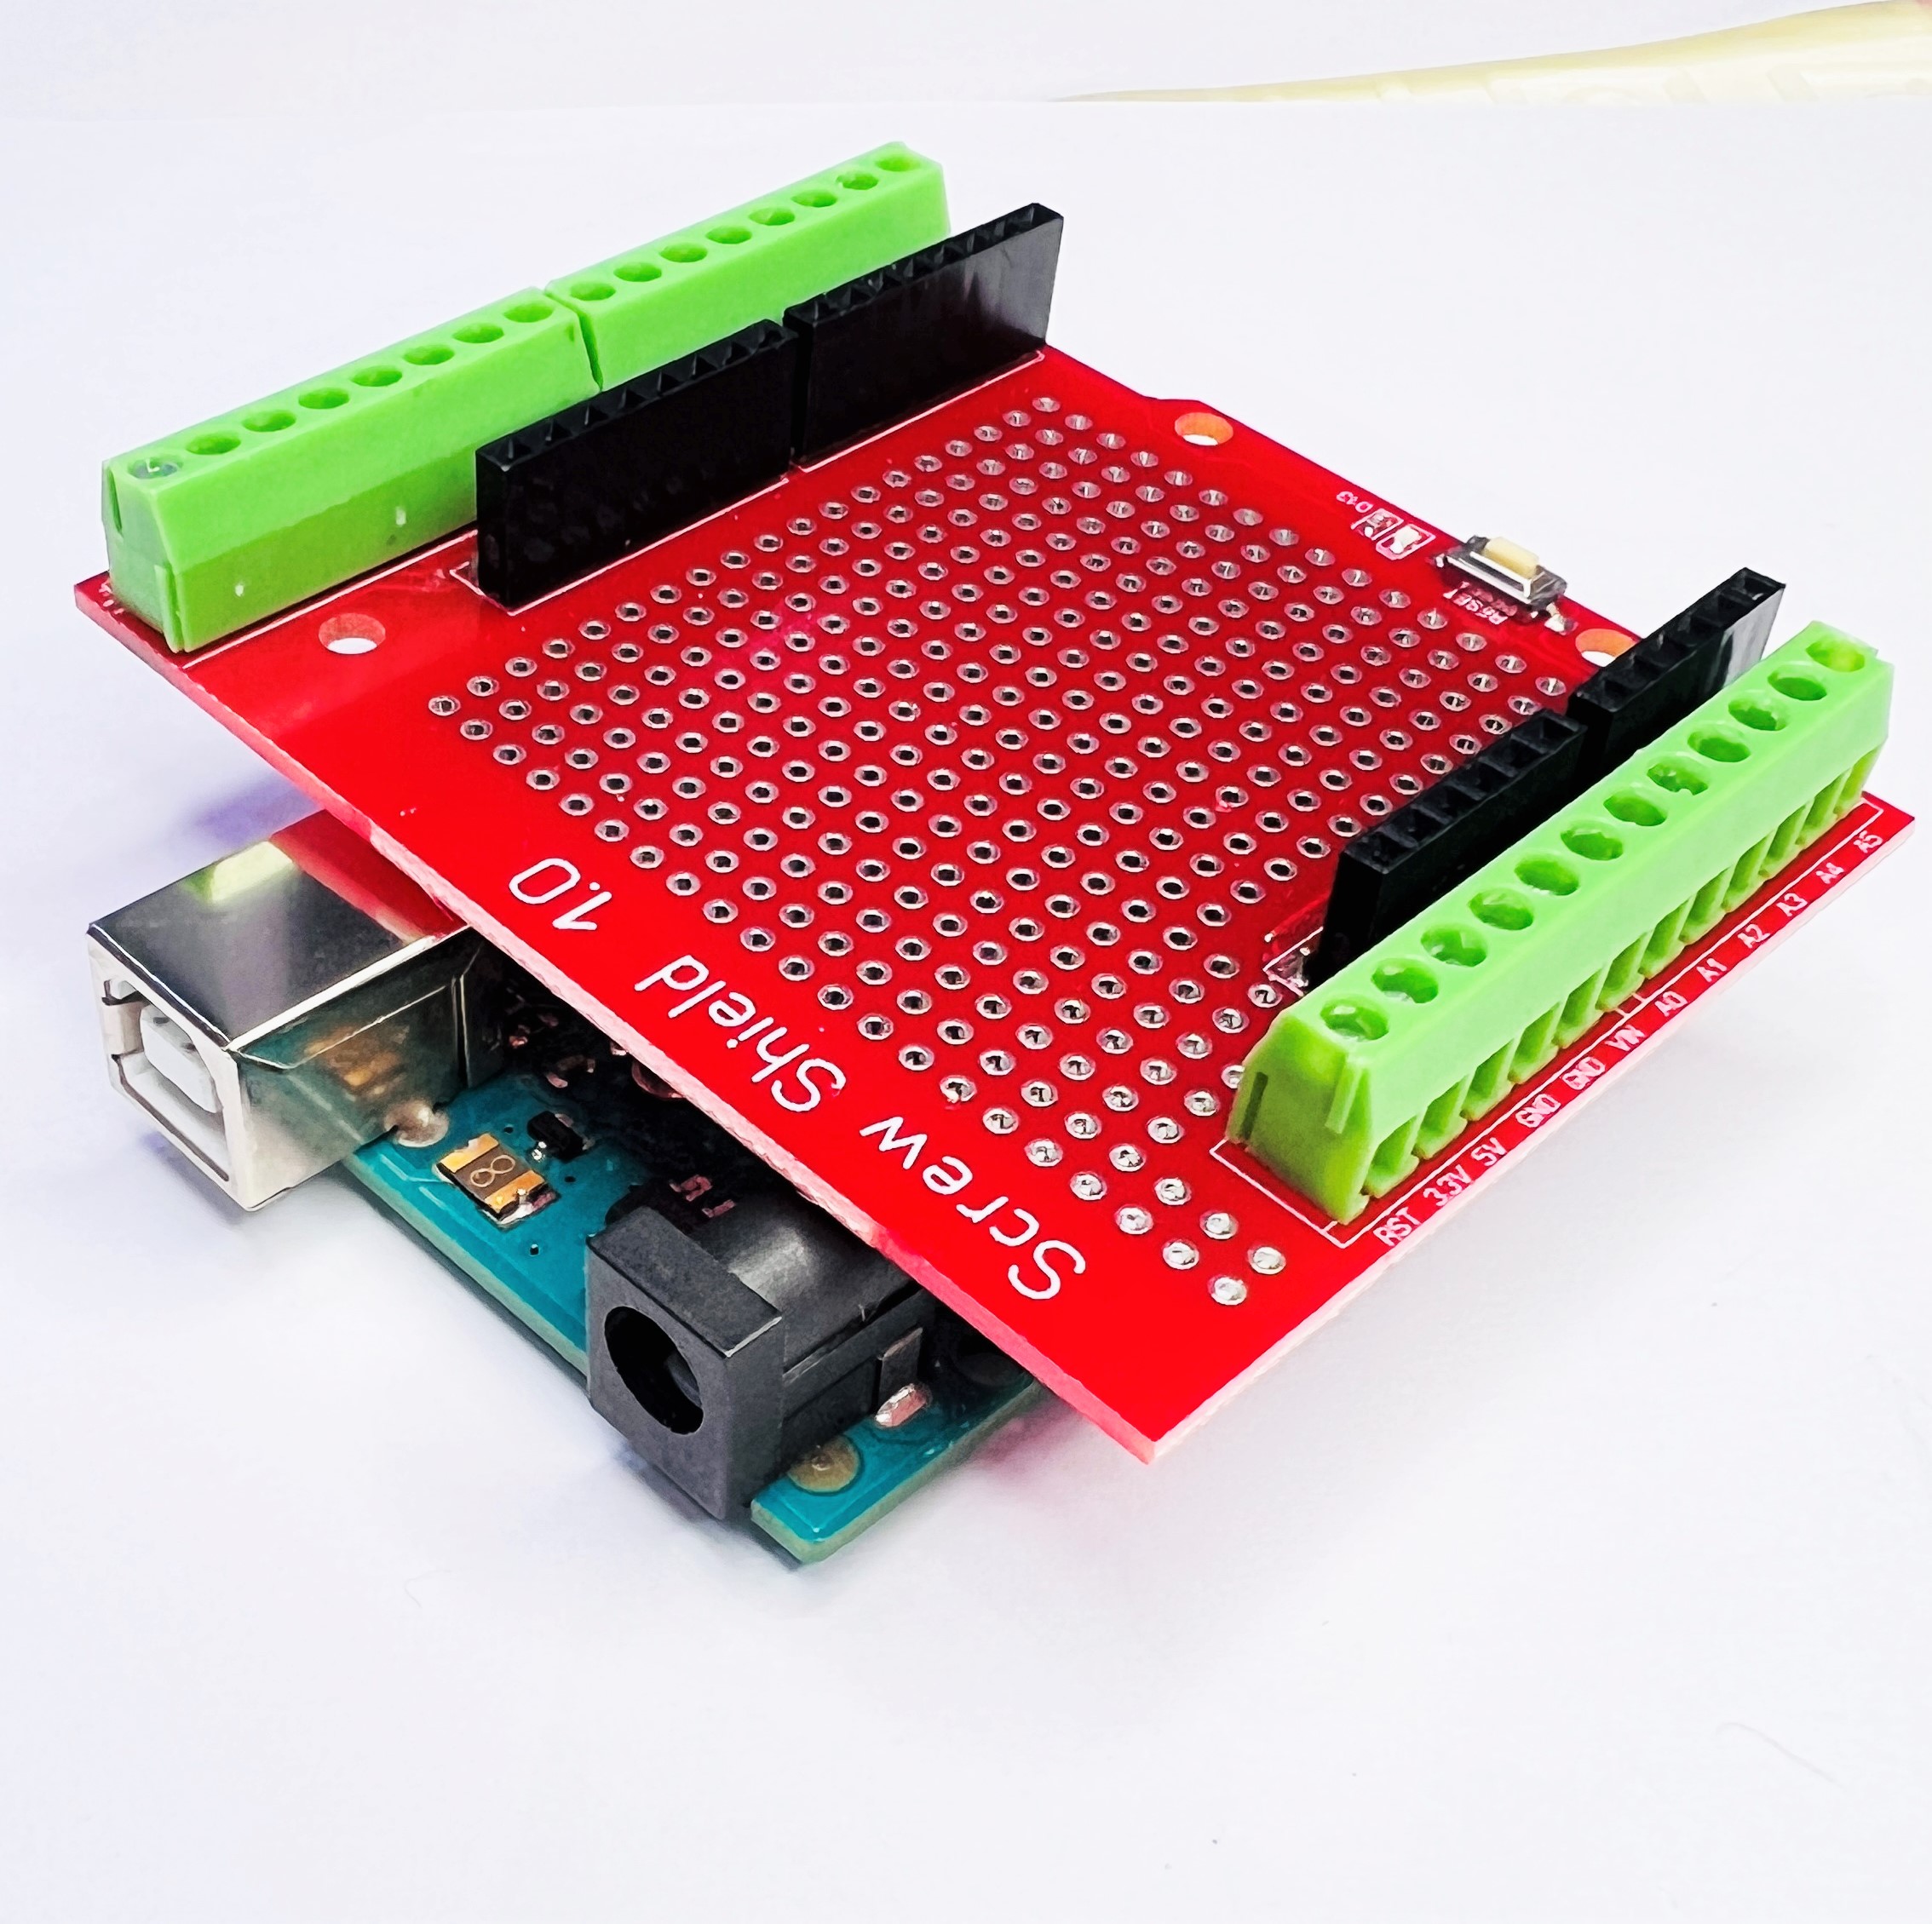 Proto Screw Shield Assembled Terminal Block Prototype Expansion Board for Arduino Uno